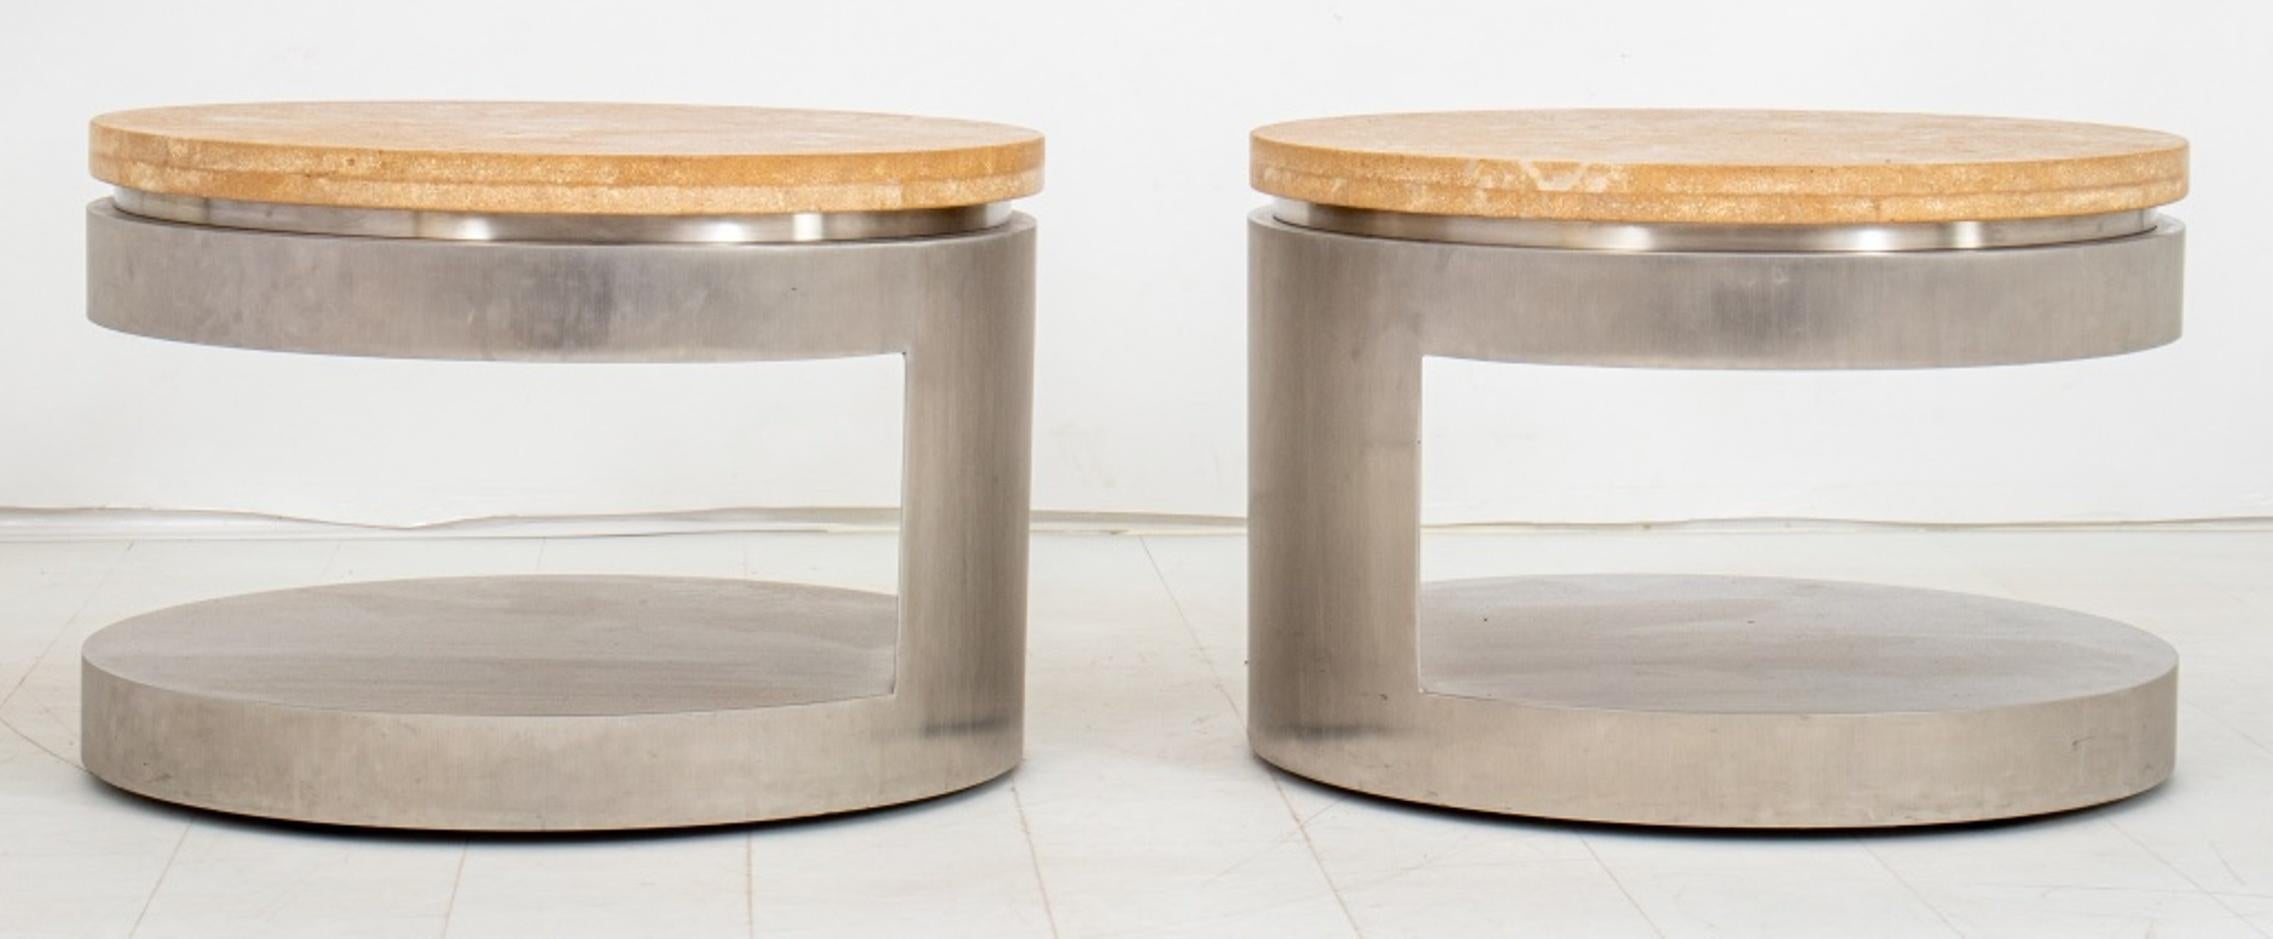 Stainless Steel Maria Pergay Style Industrial Modern Tables, Pair